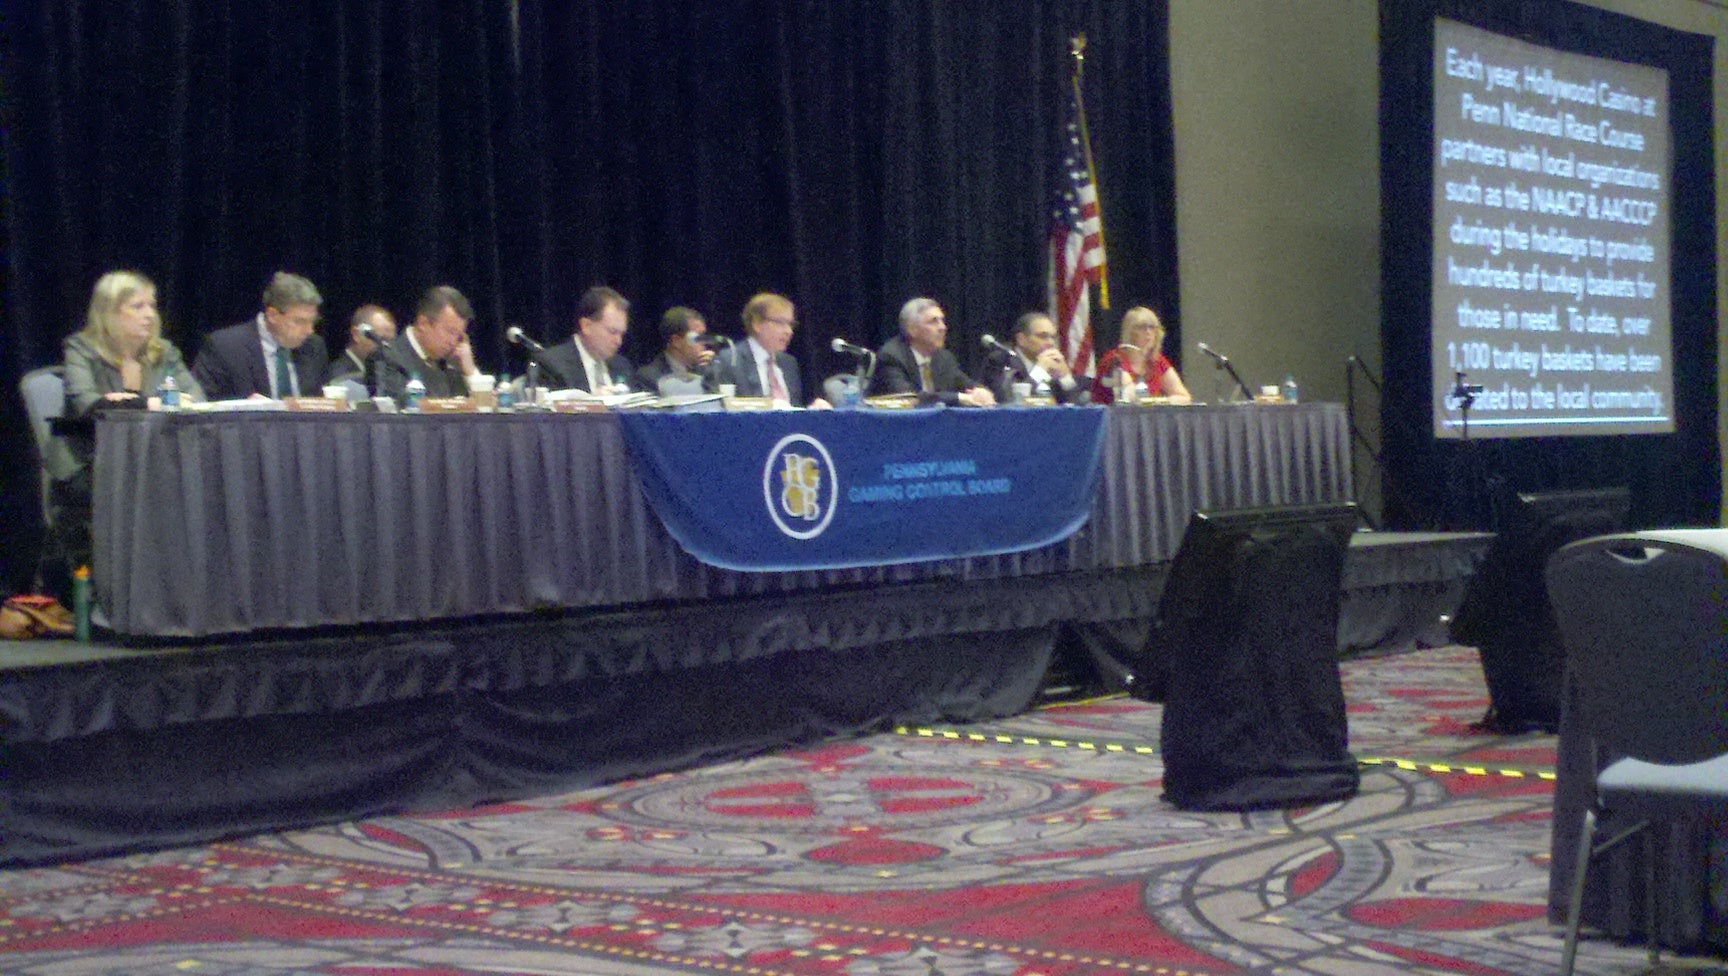 The first day of casino suitability hearings are underway